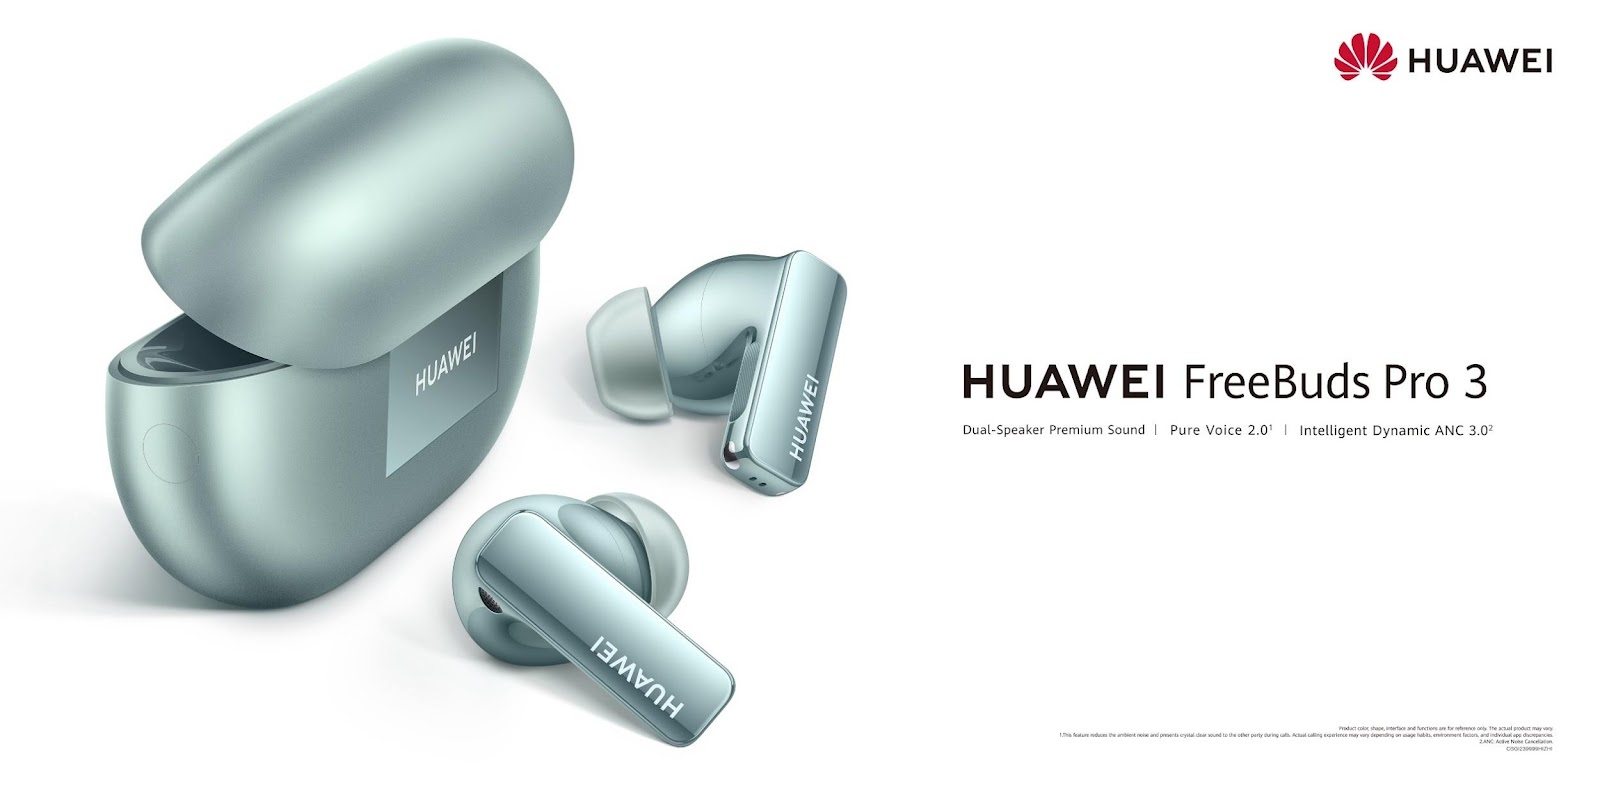 A close-up of a huawei wireless earbuds
Description automatically generated